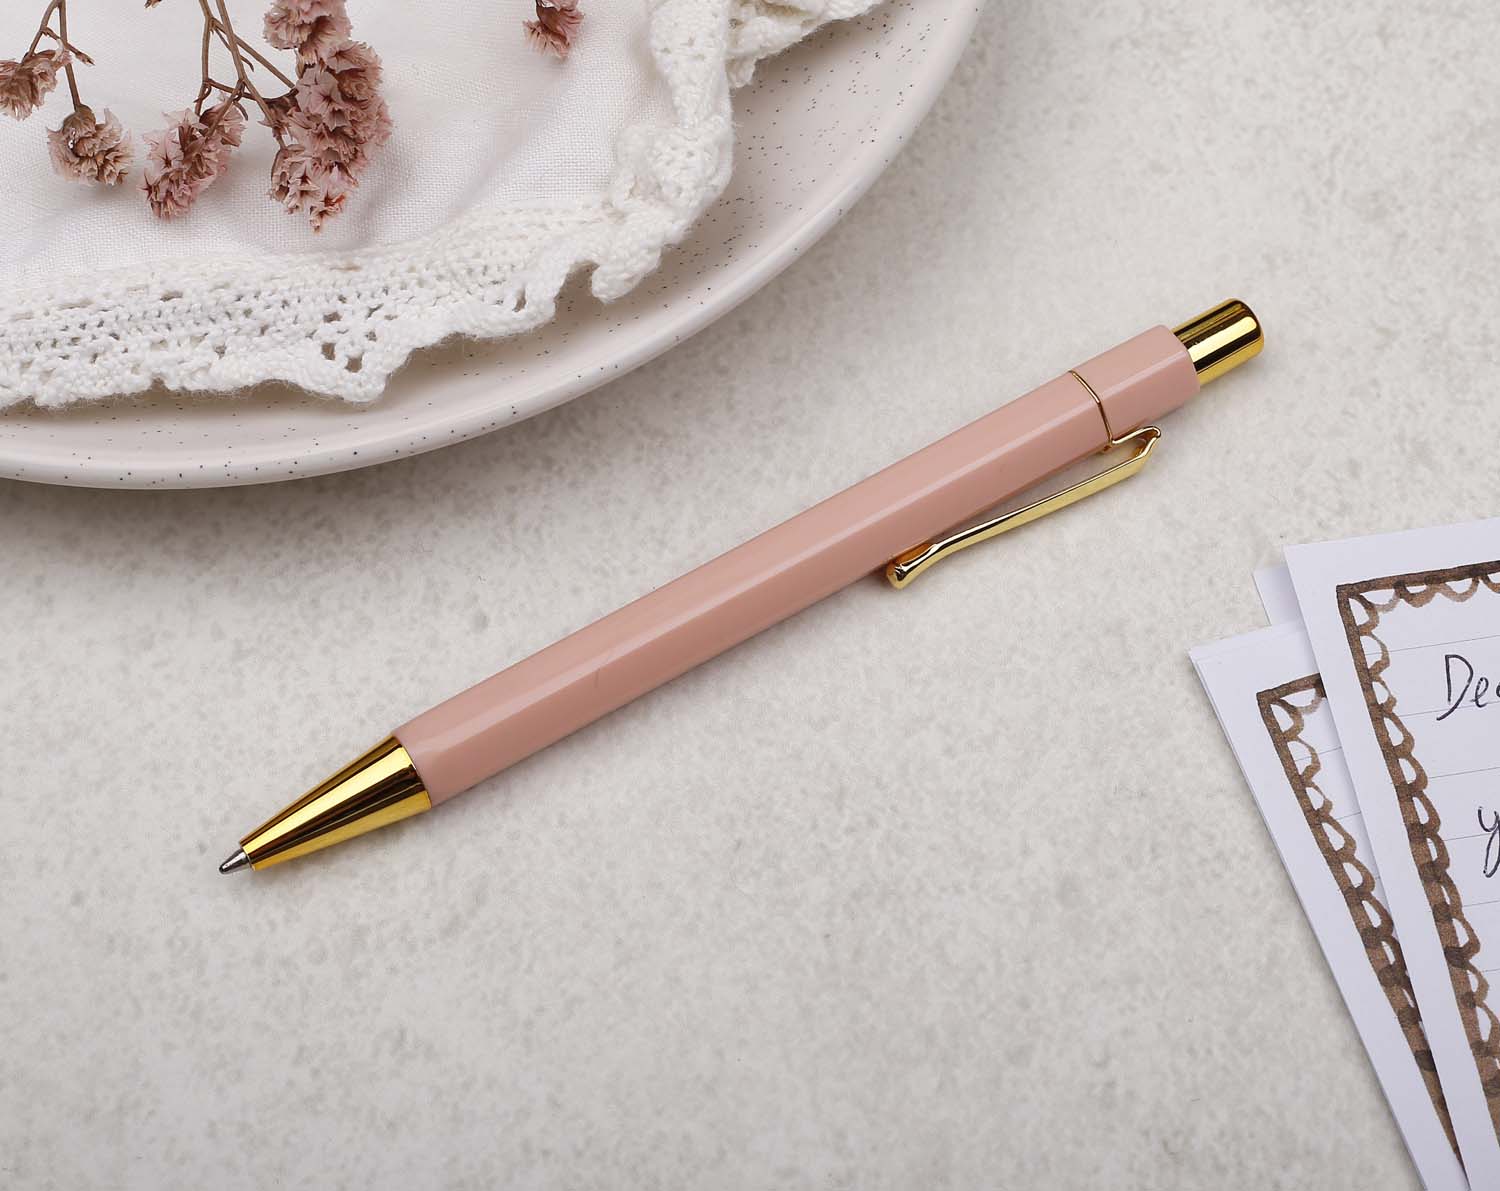 A premium peach and gold pen with ballpoint tip and hexagonal barrel detail